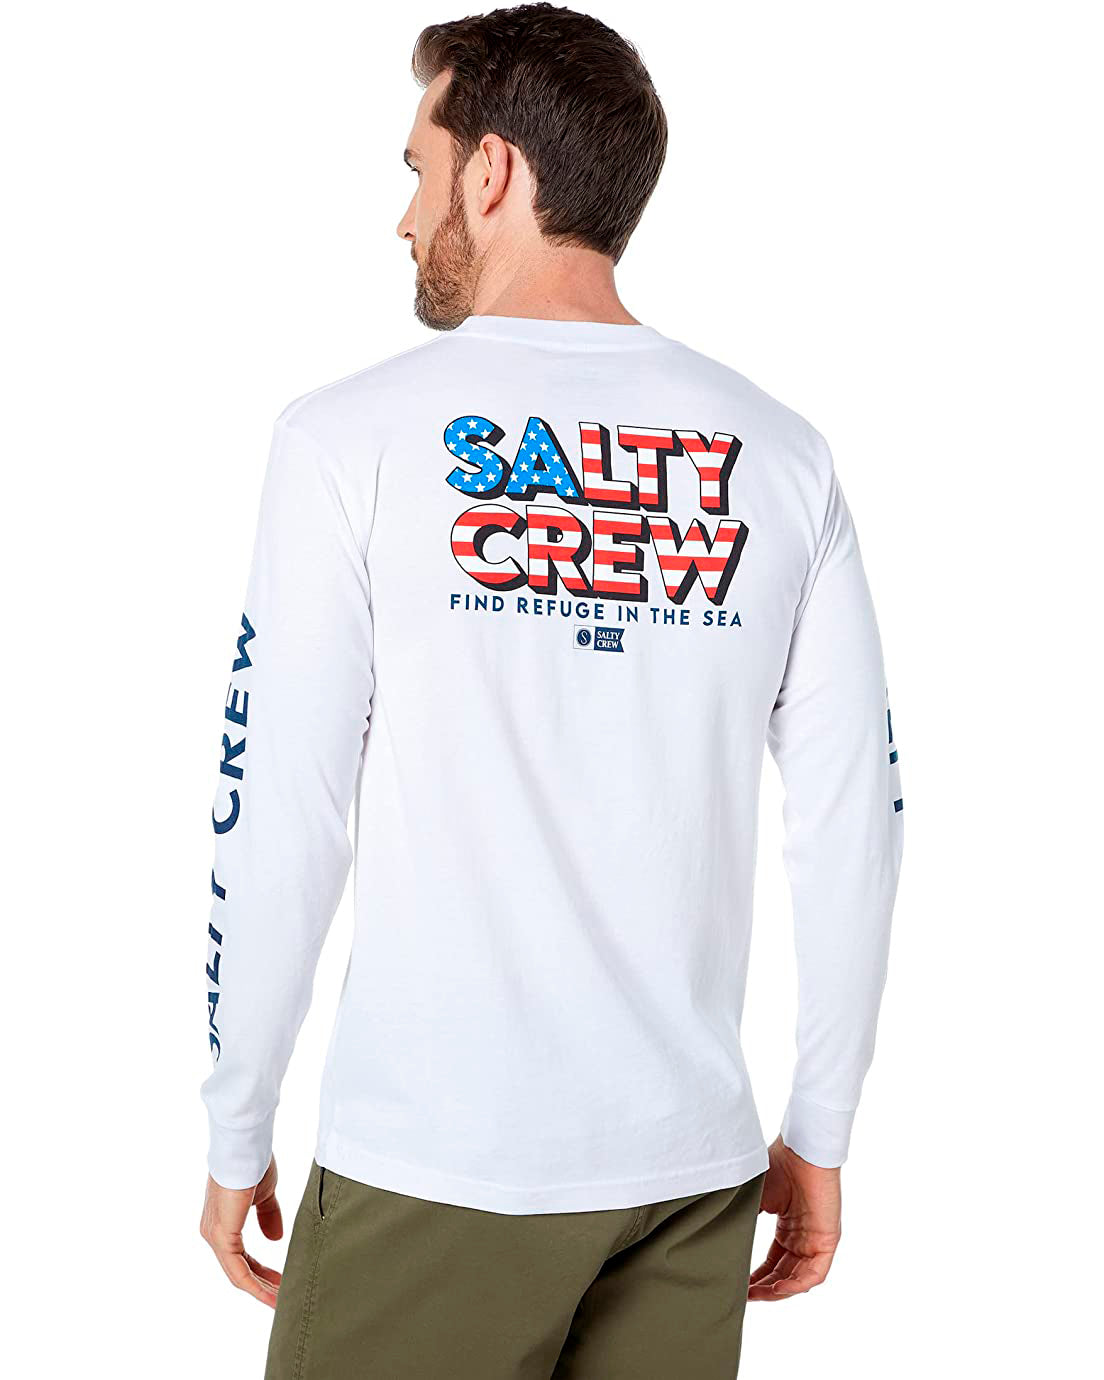 Salty Crew Stars and Stripes LS Tee White XL